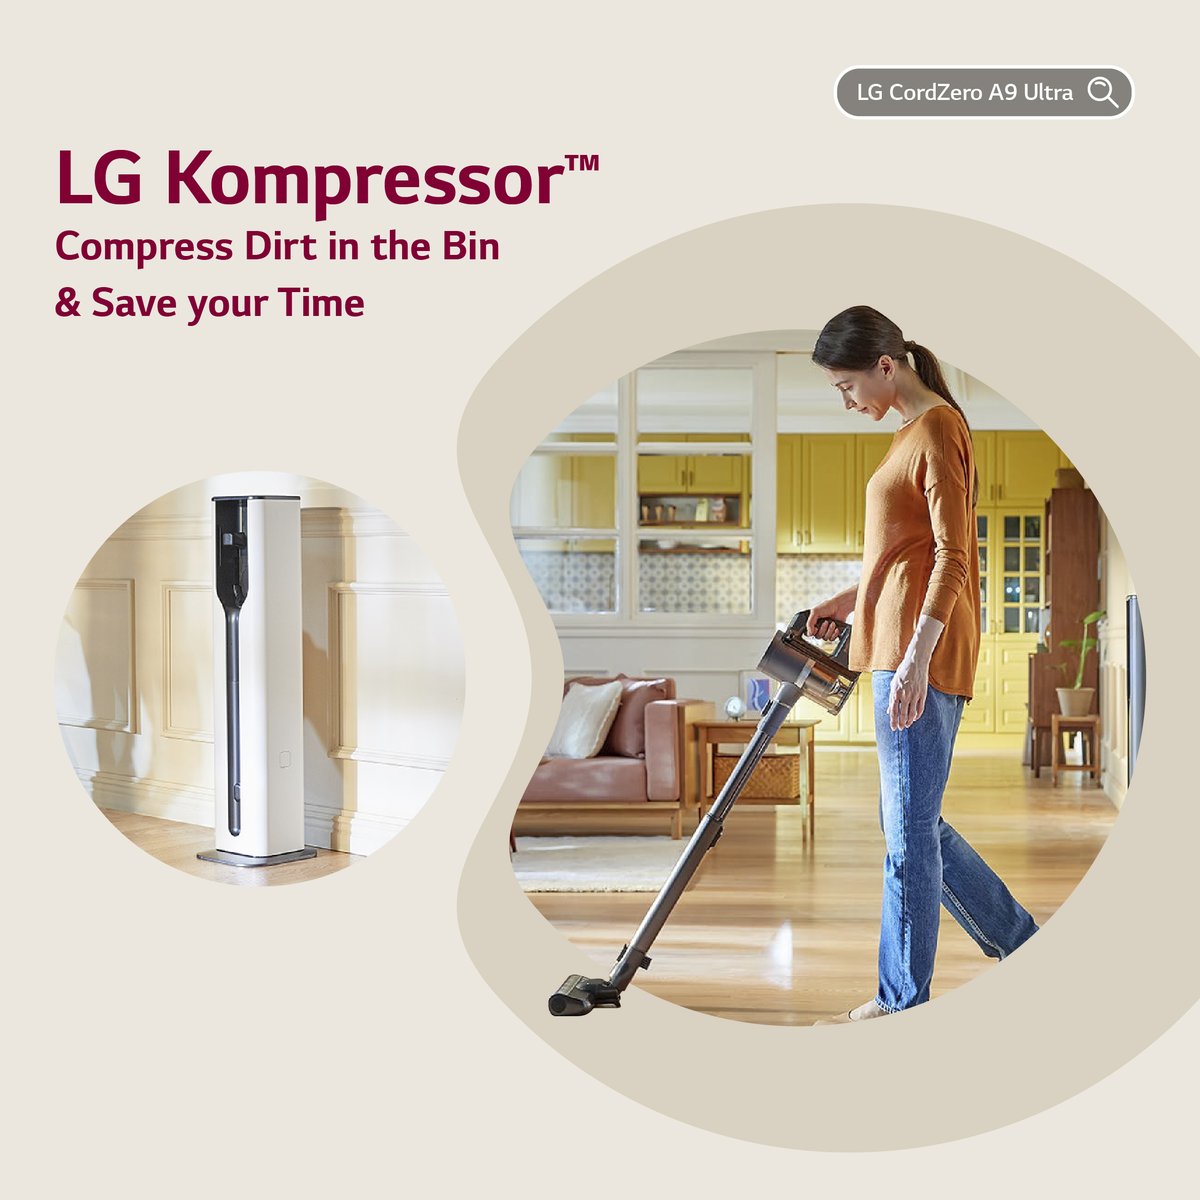 The revolutionary LG CordZero A9 vacuum cleaner features the innovative LG Kompressor™ technology, which automatically compresses dirt in the bin – saving you precious time and effort.
Learn More: lge.ai/6015jyBbN

#LG #LGGulf #LGCordZero #LifesGood